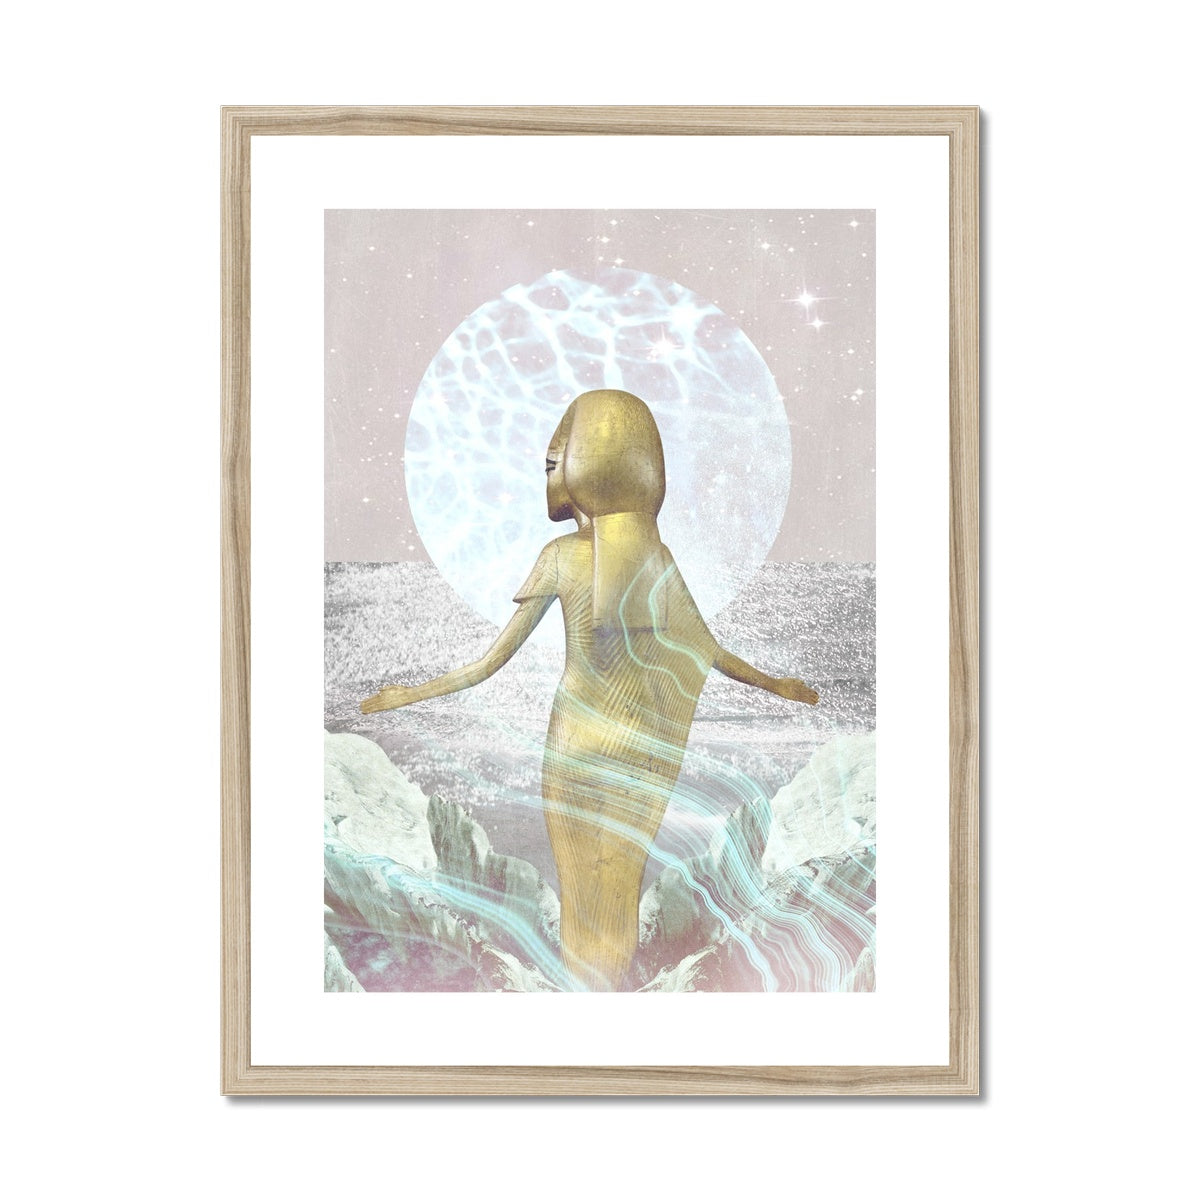 Guardian  Framed & Mounted Print - Starseed Designs Inc.